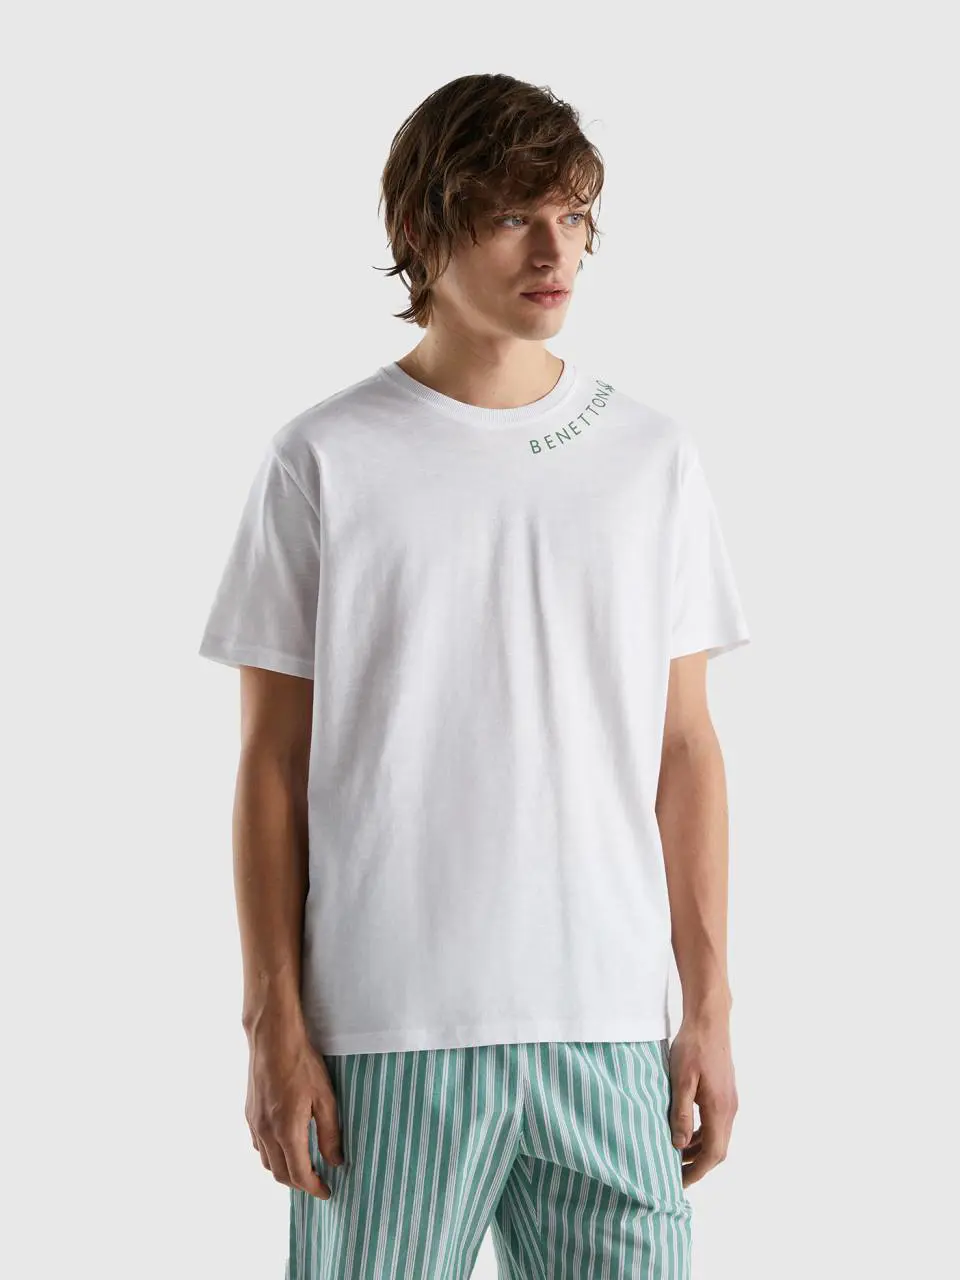 Benetton shirt with print on the crew neck. 1